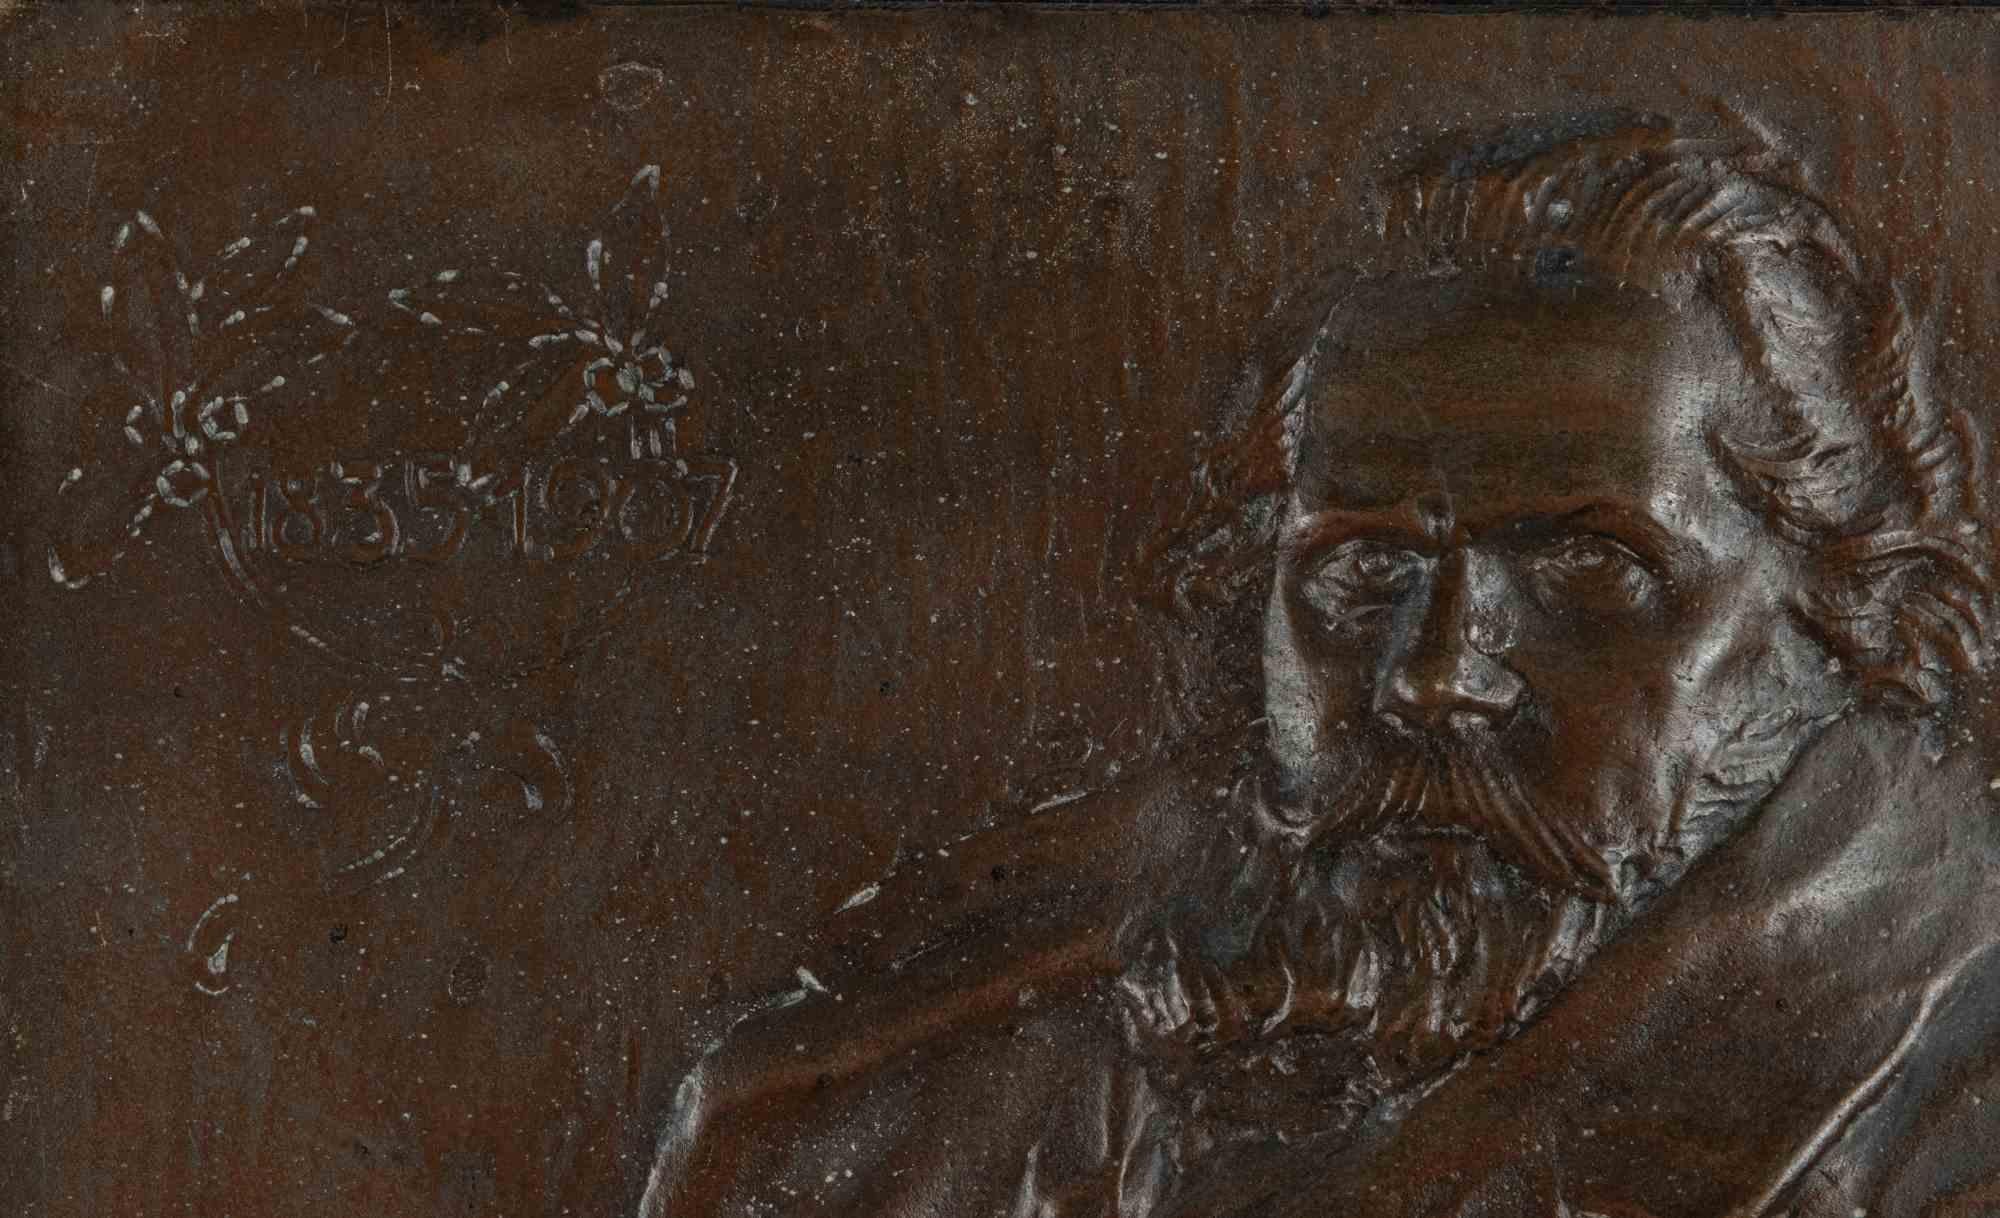 Portrait of Giosuè Carducci is an original modern artwork realized by Libero Andreotti in the first half of 20th century.

Relief on copper plate.

Includes frame.

Signature on the lower margin.

Libero Andreotti (Pescia, Pistoia, June 15, 1875 -